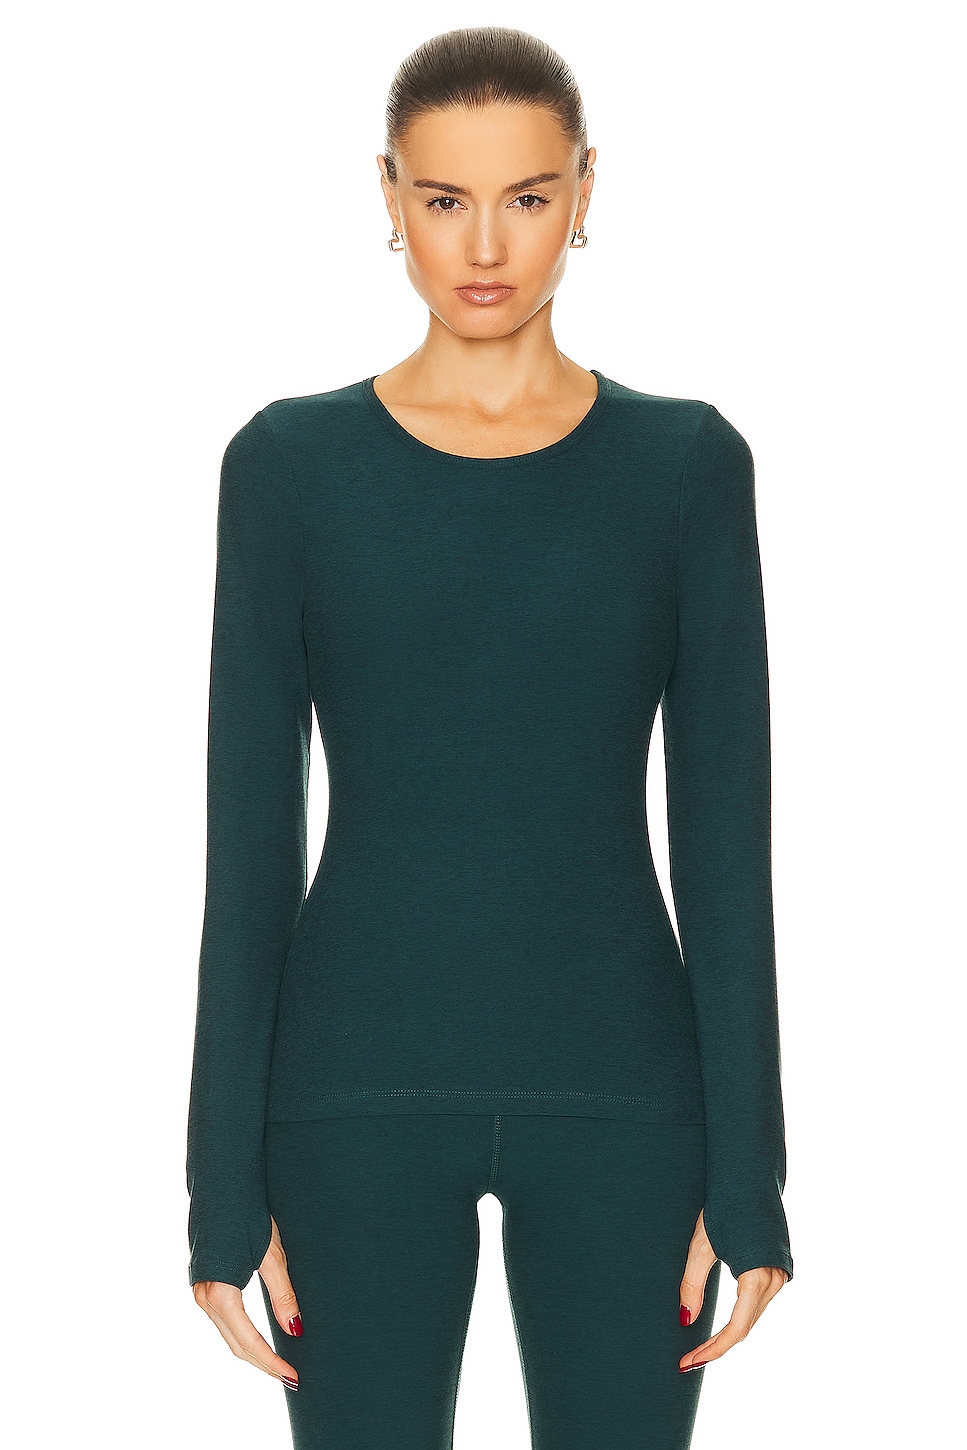 Image 1 of Beyond Yoga Spacedye Classic Crew Pullover Top in Midnight Green Heather